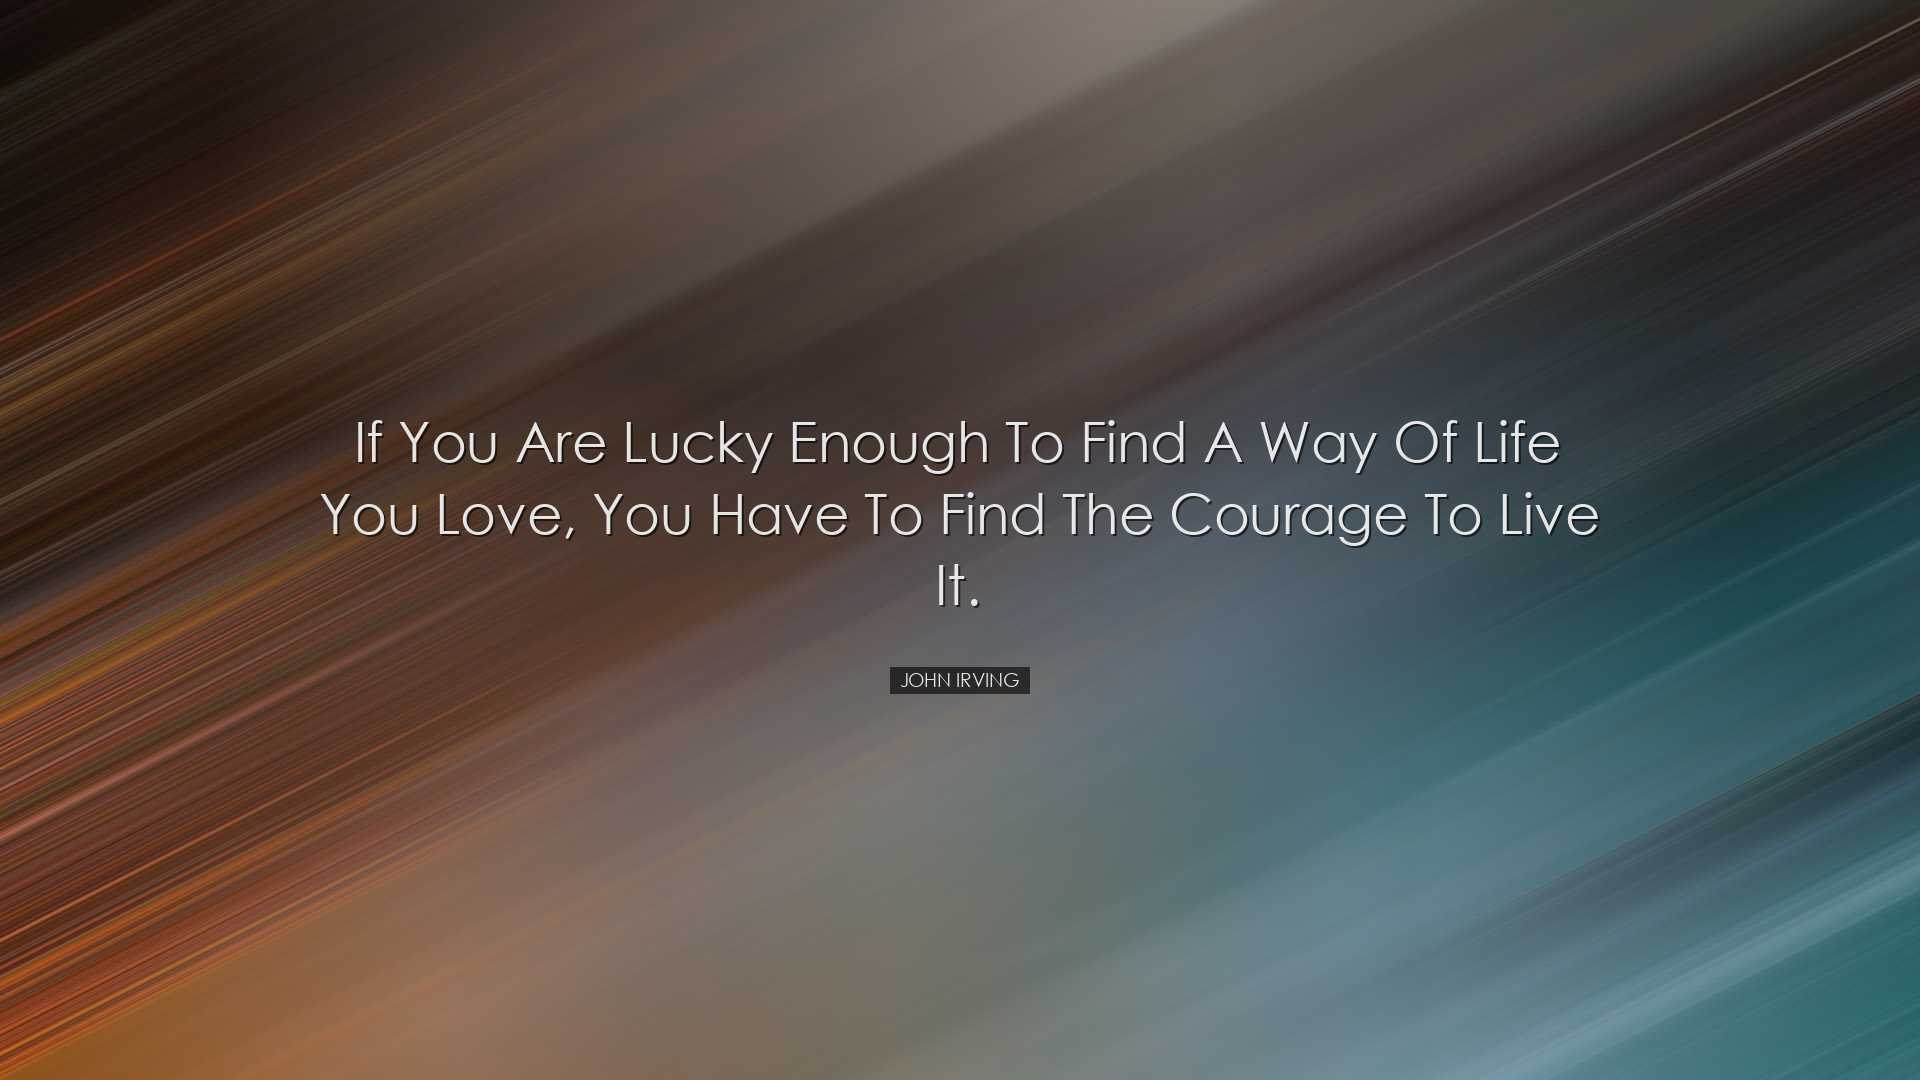 If you are lucky enough to find a way of life you love, you have t